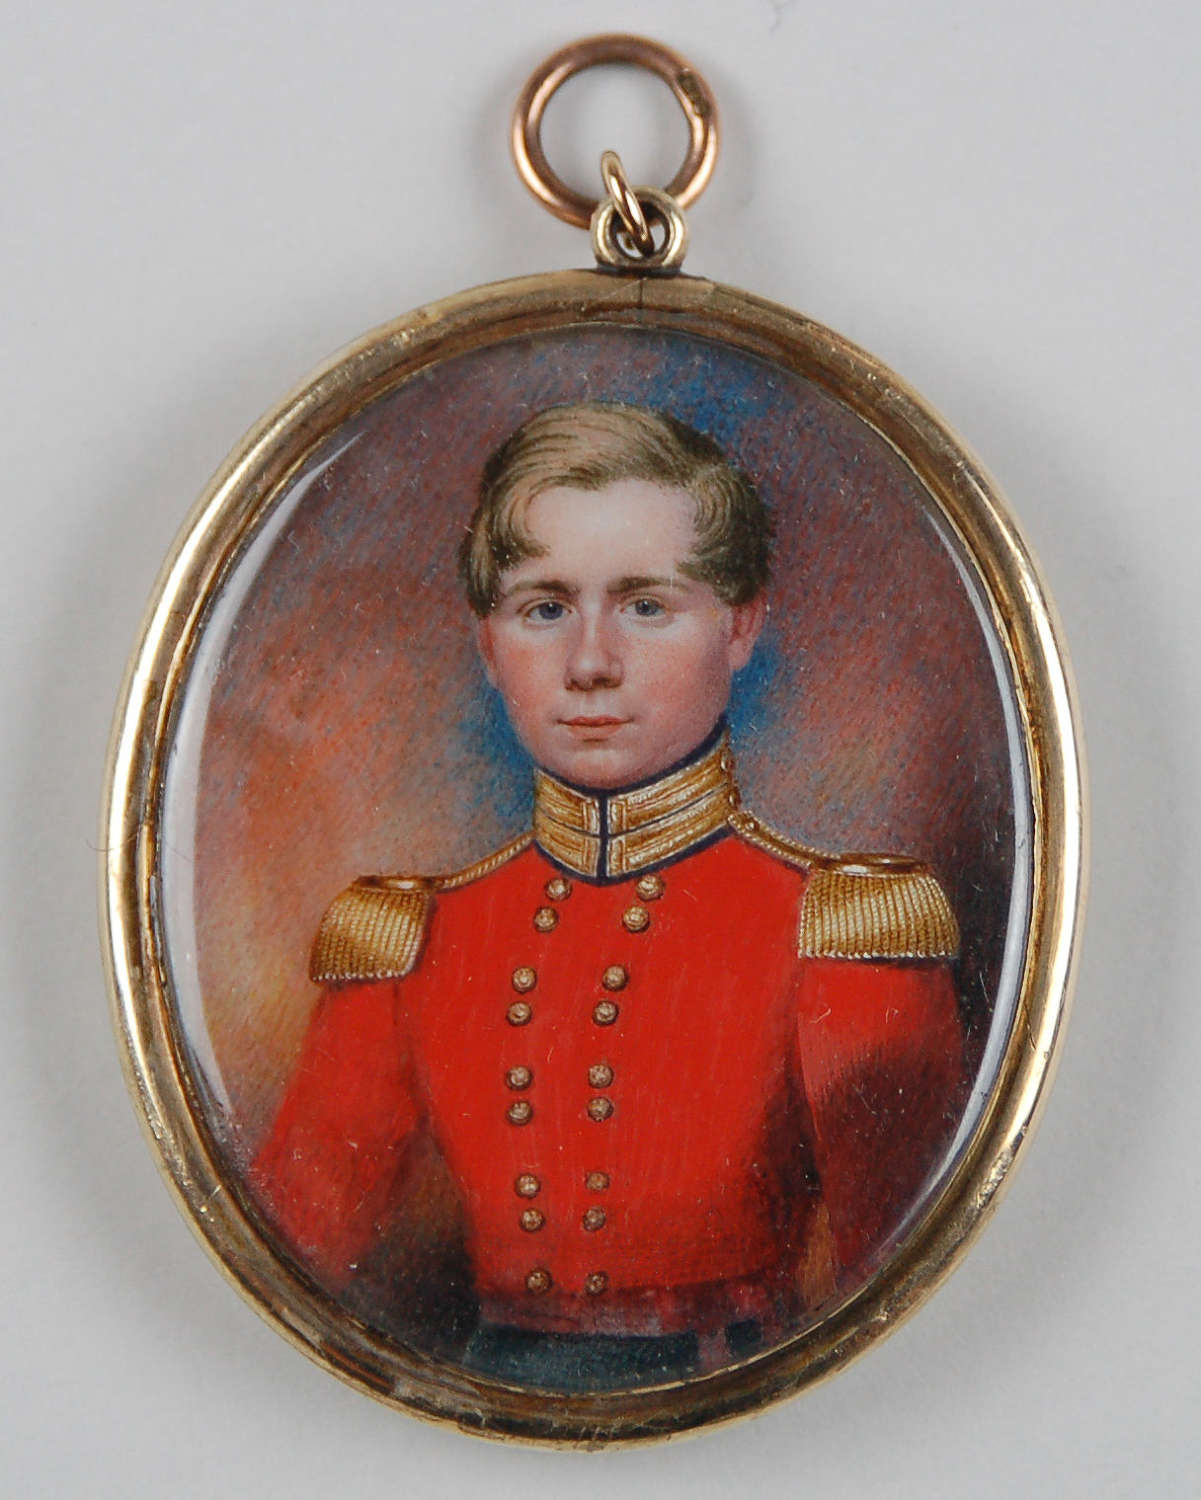 Miniature of a military officer by P Paillou Jr C1820